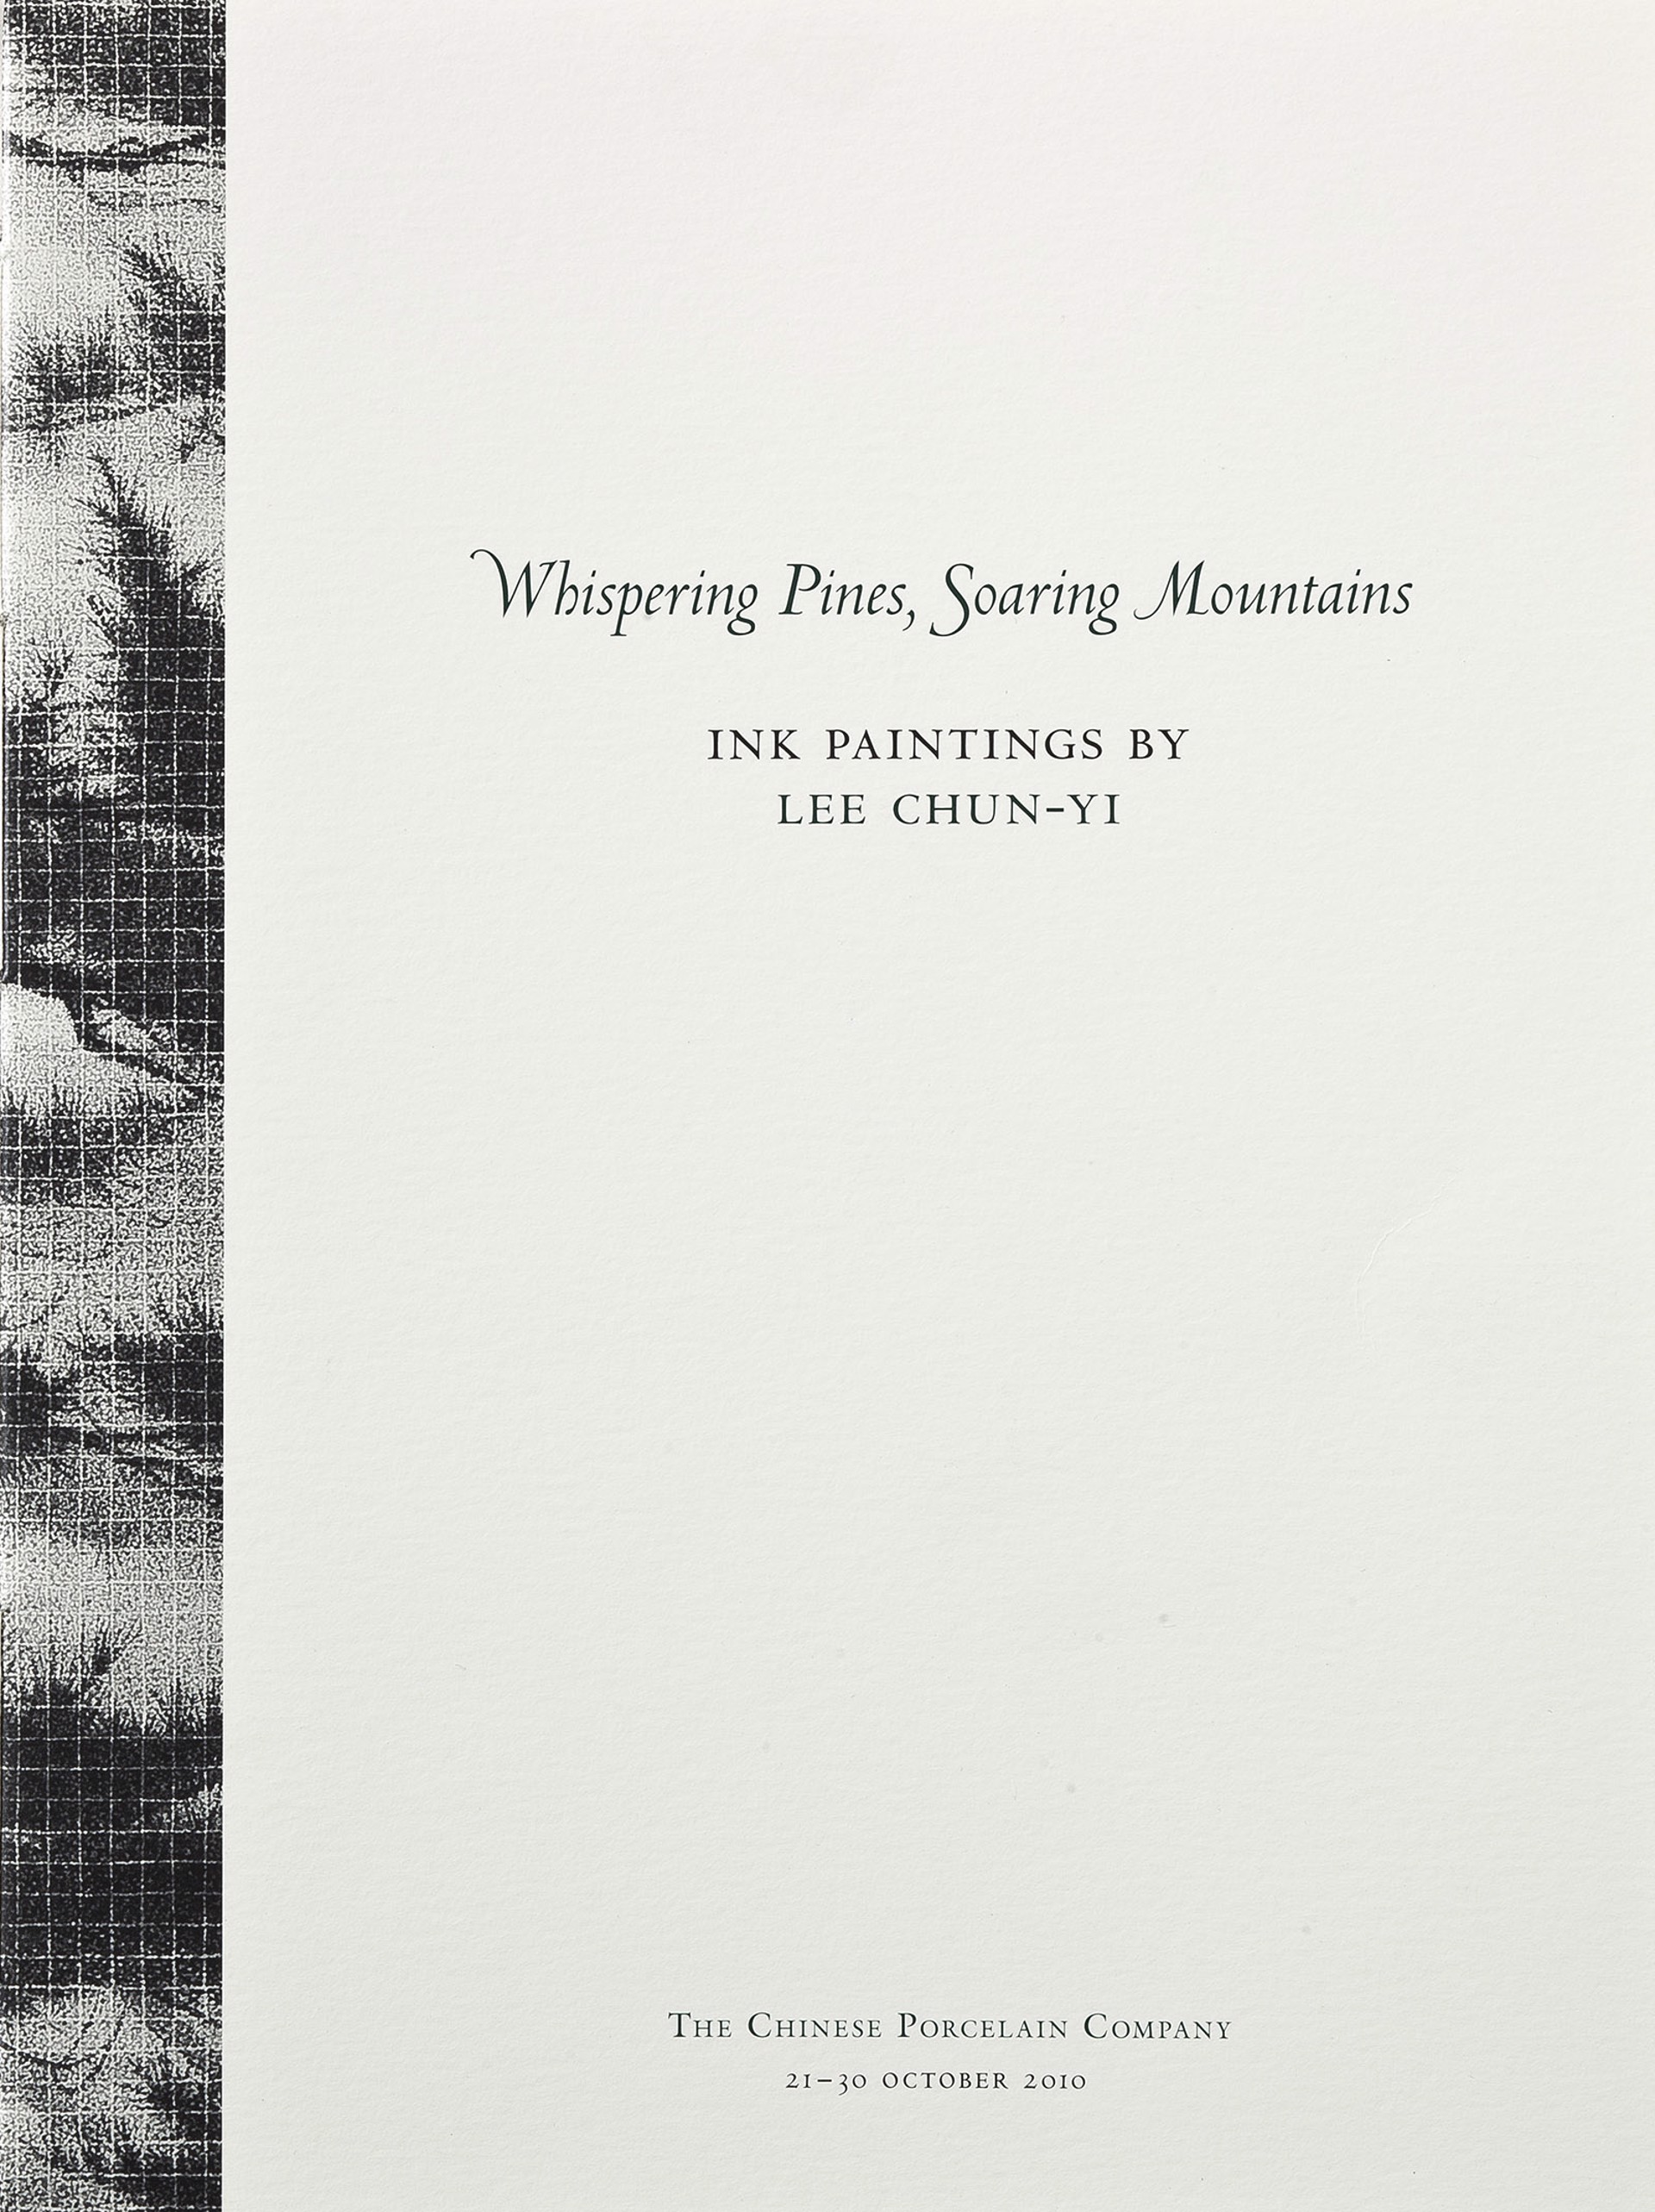 Whispering PInes, Soaring Mountains, Ink Paintings by Lee Chun-Yi (out of print) by Brochure 13